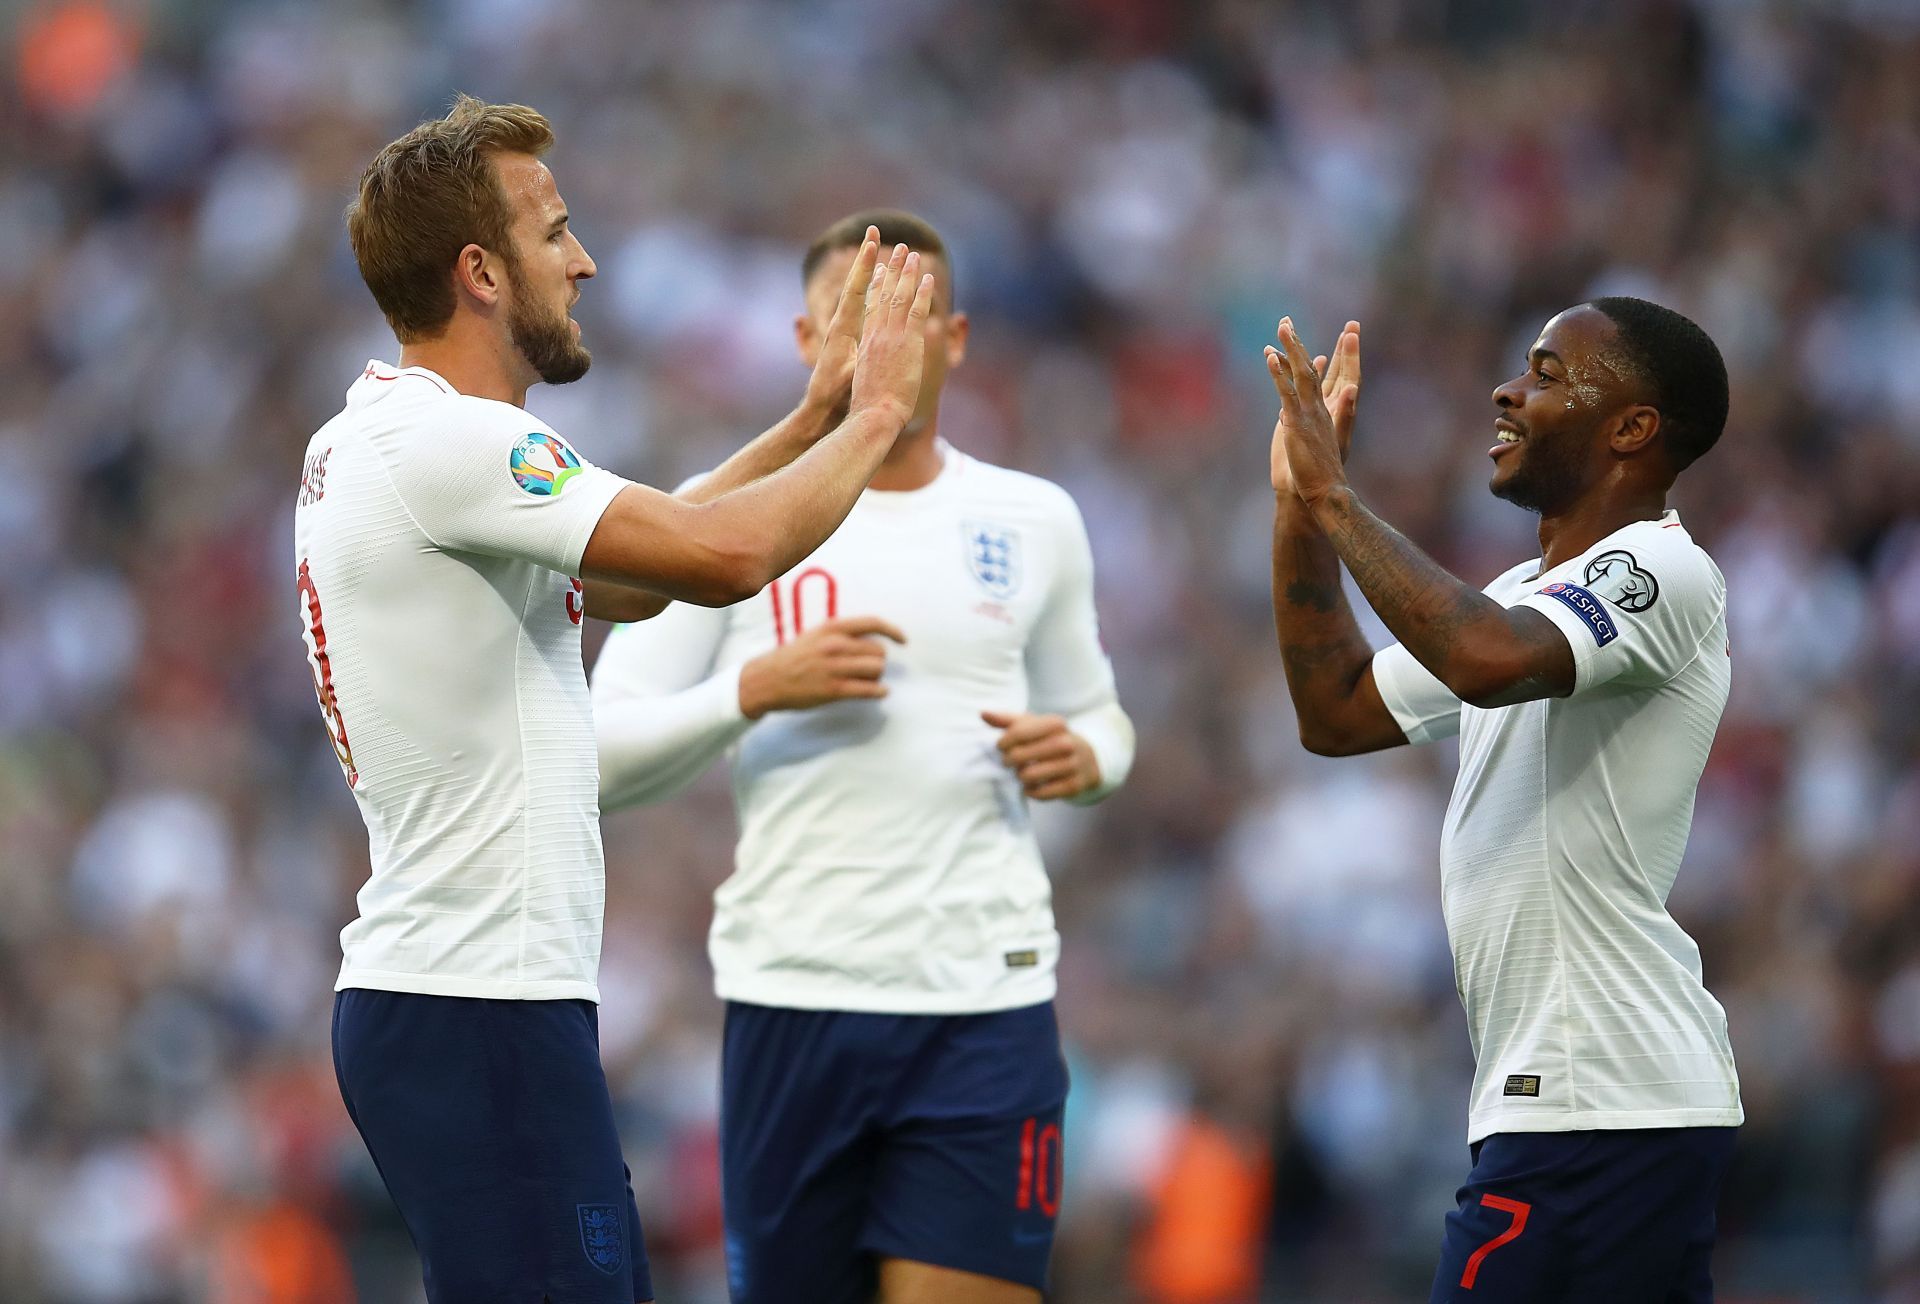 Kane and Sterling will link up at the World Cup